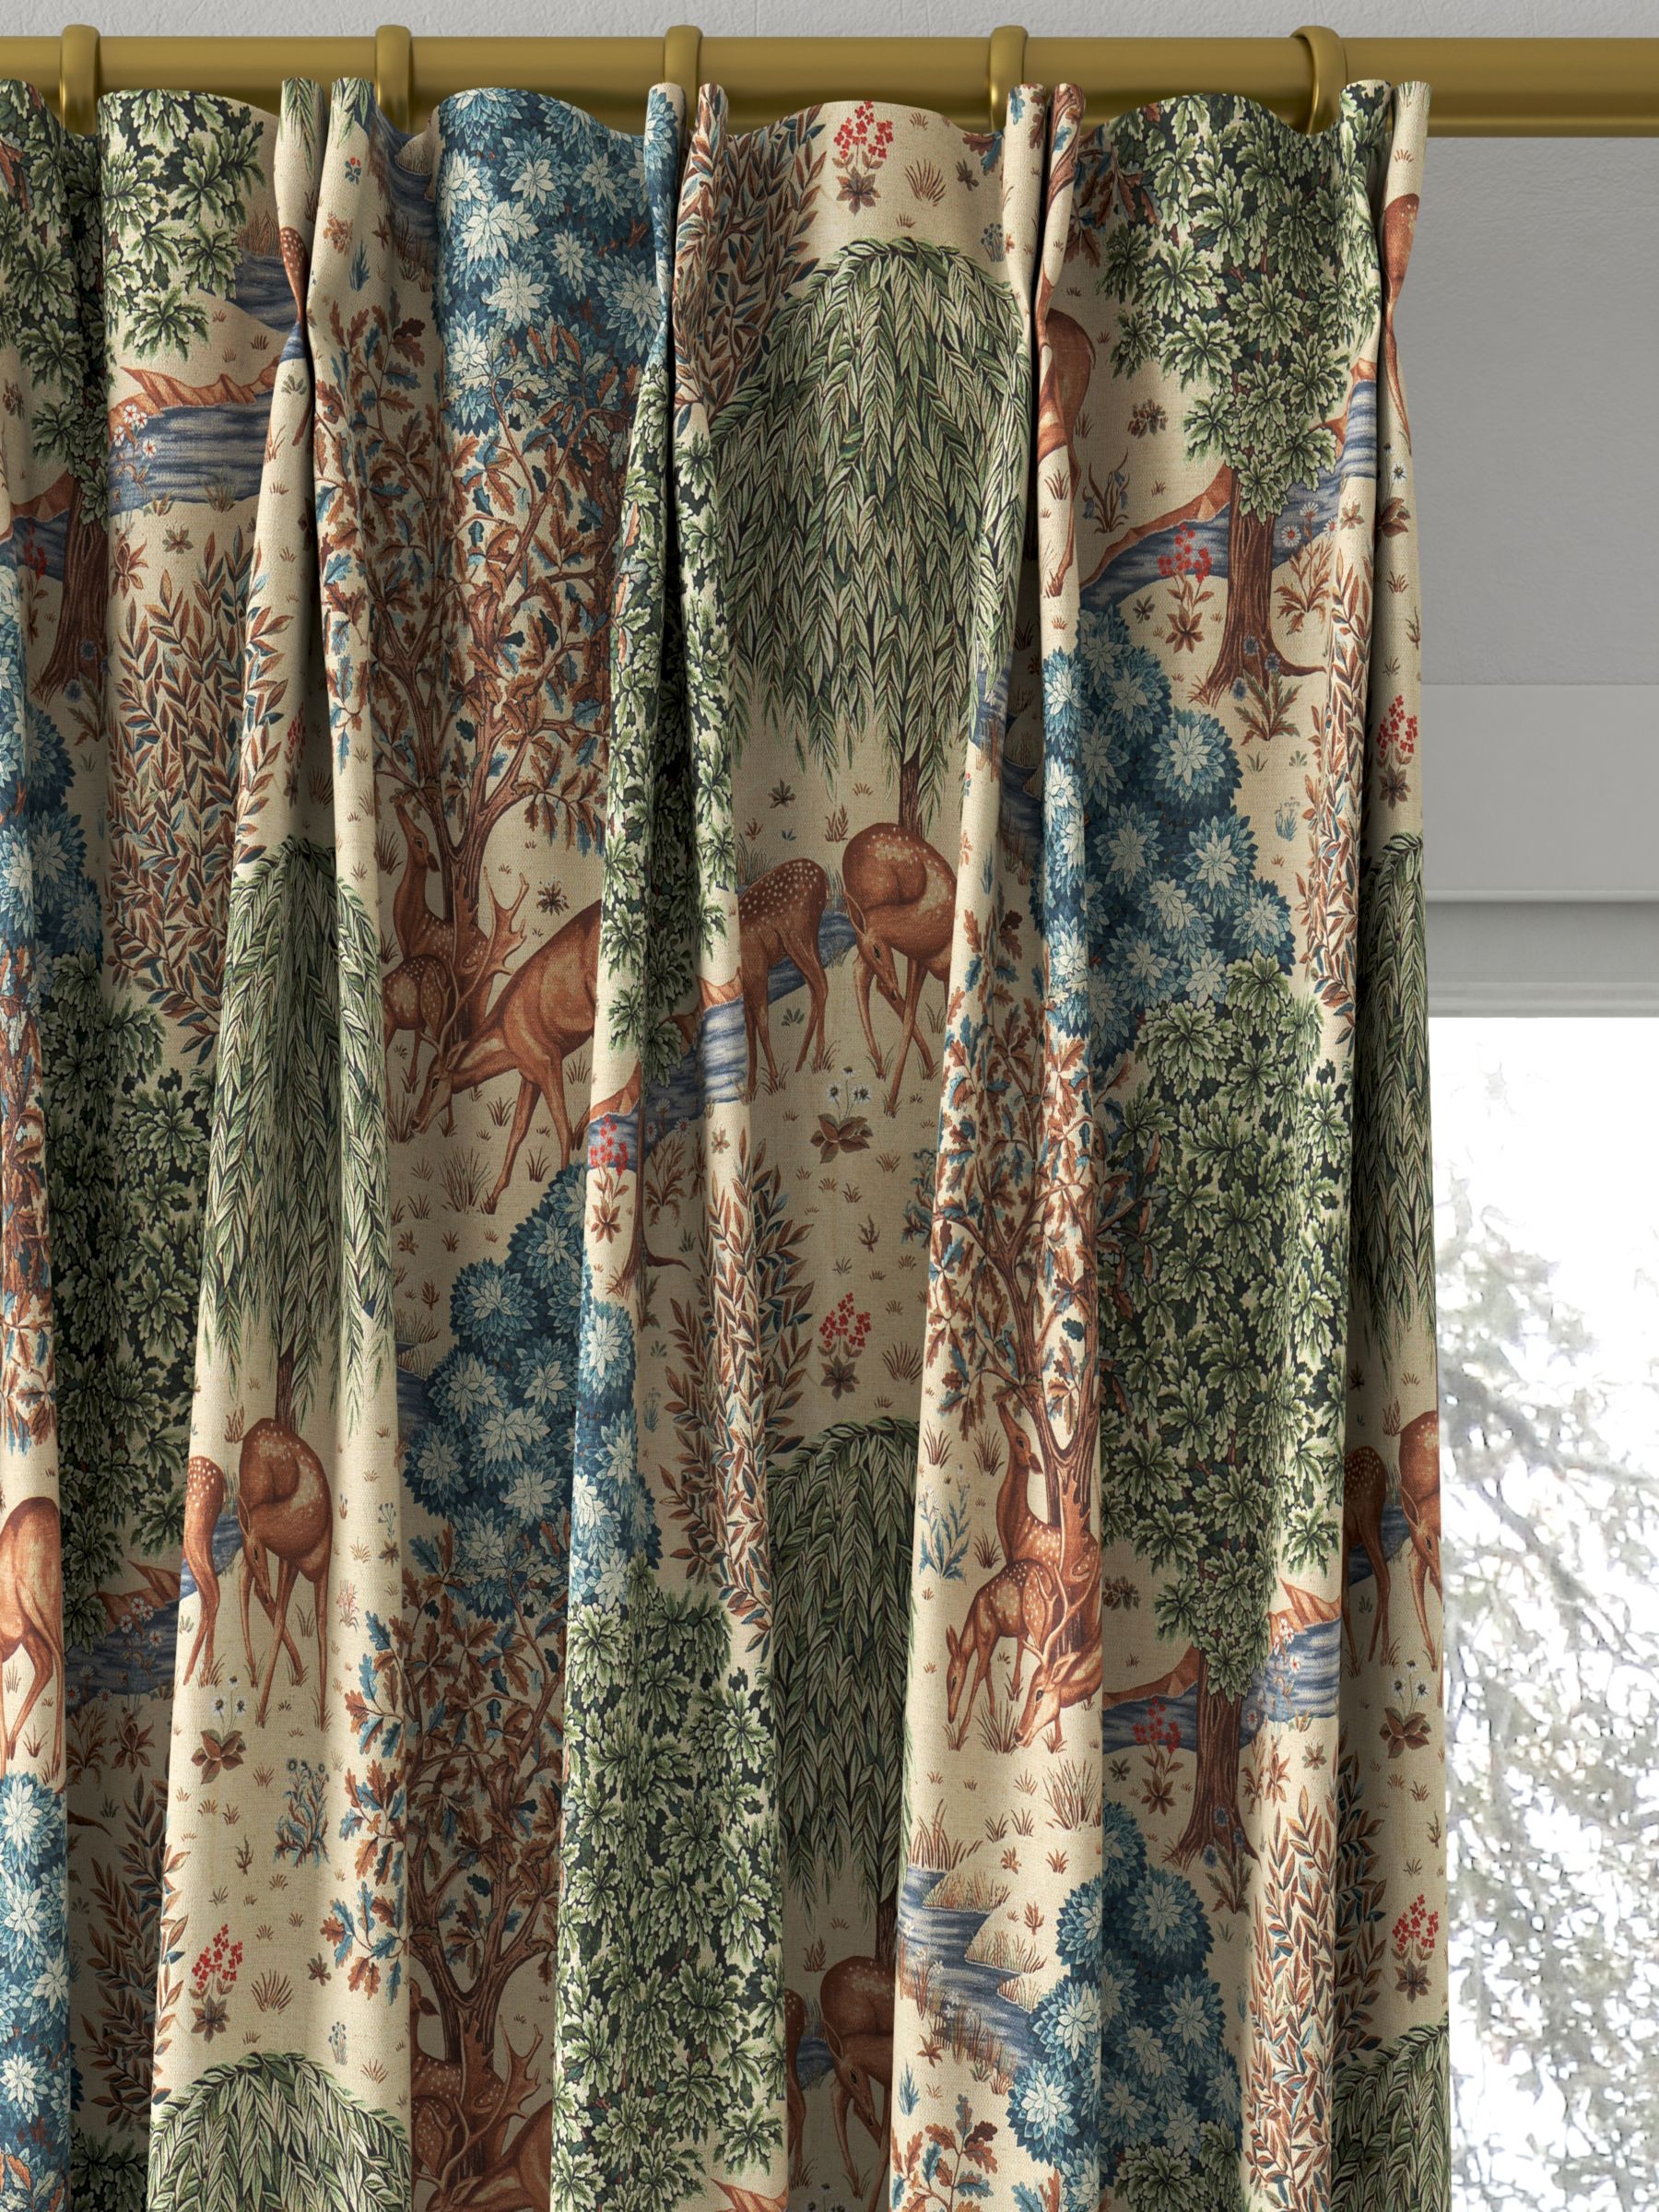 Morris & Co. The Brook Tapestry Made to Measure Curtains, Tapestry Linen